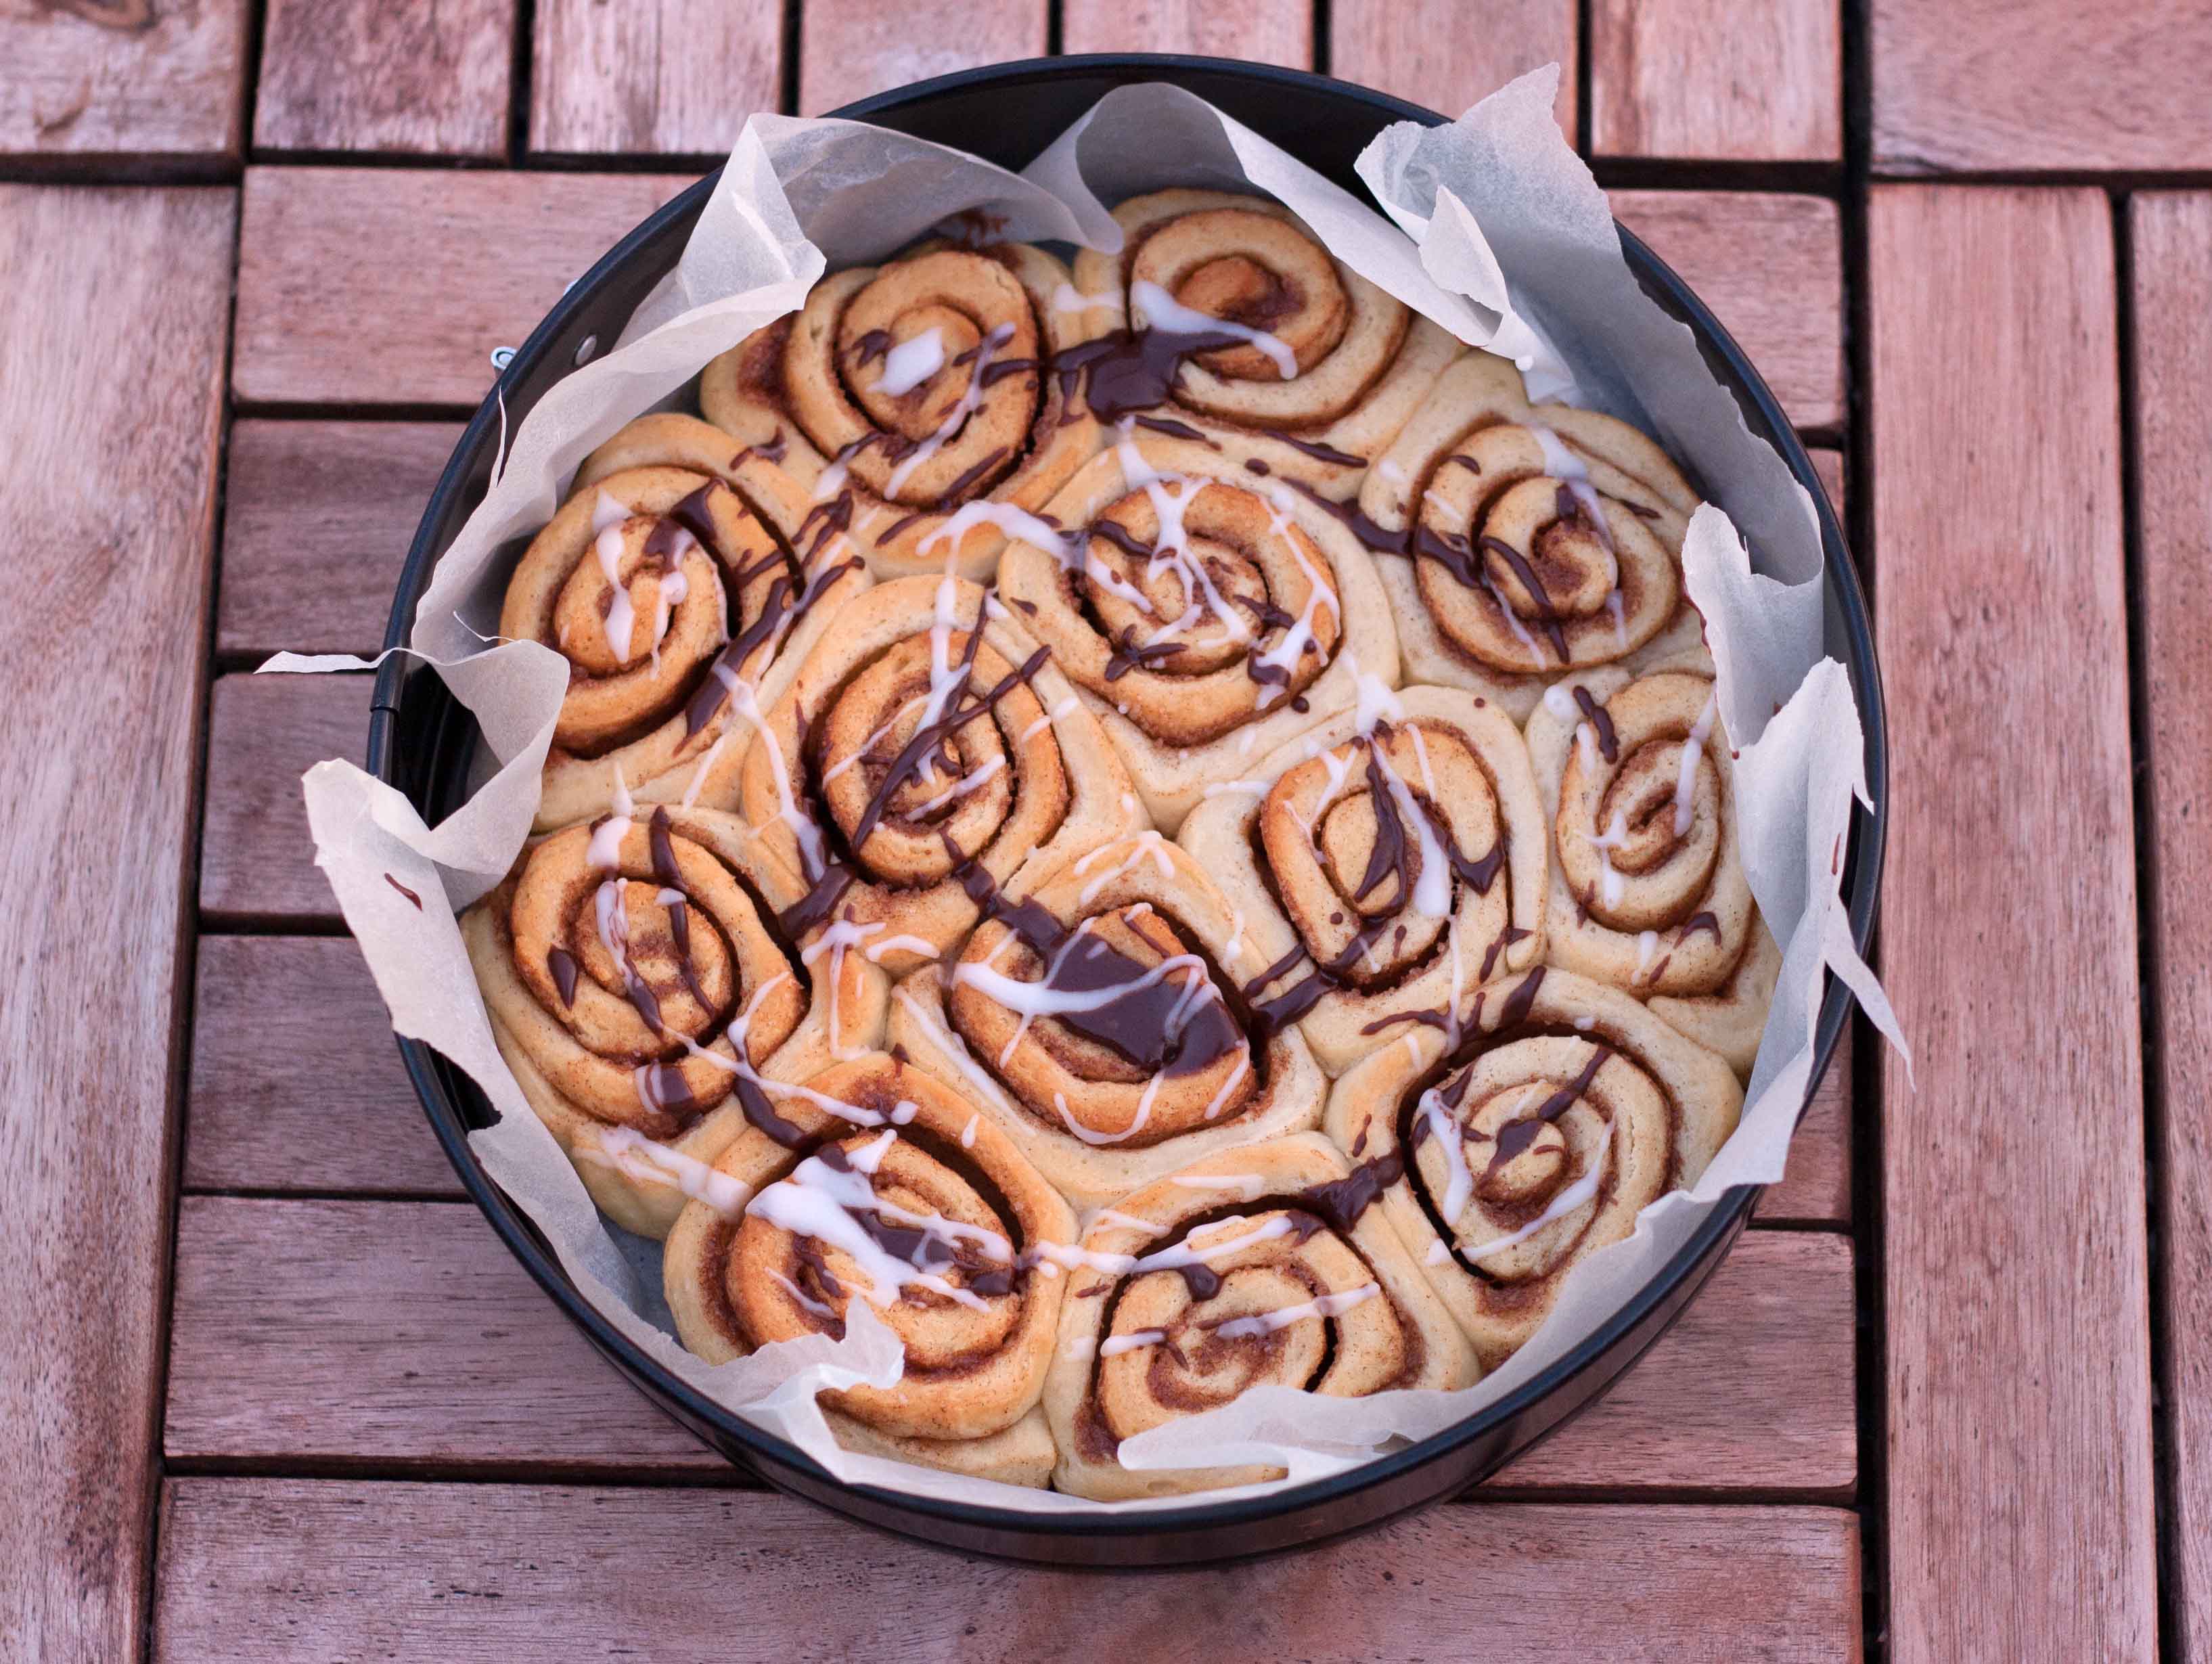 Recipe for homemade Cinnamon buns (rolls) - with no dry edges!